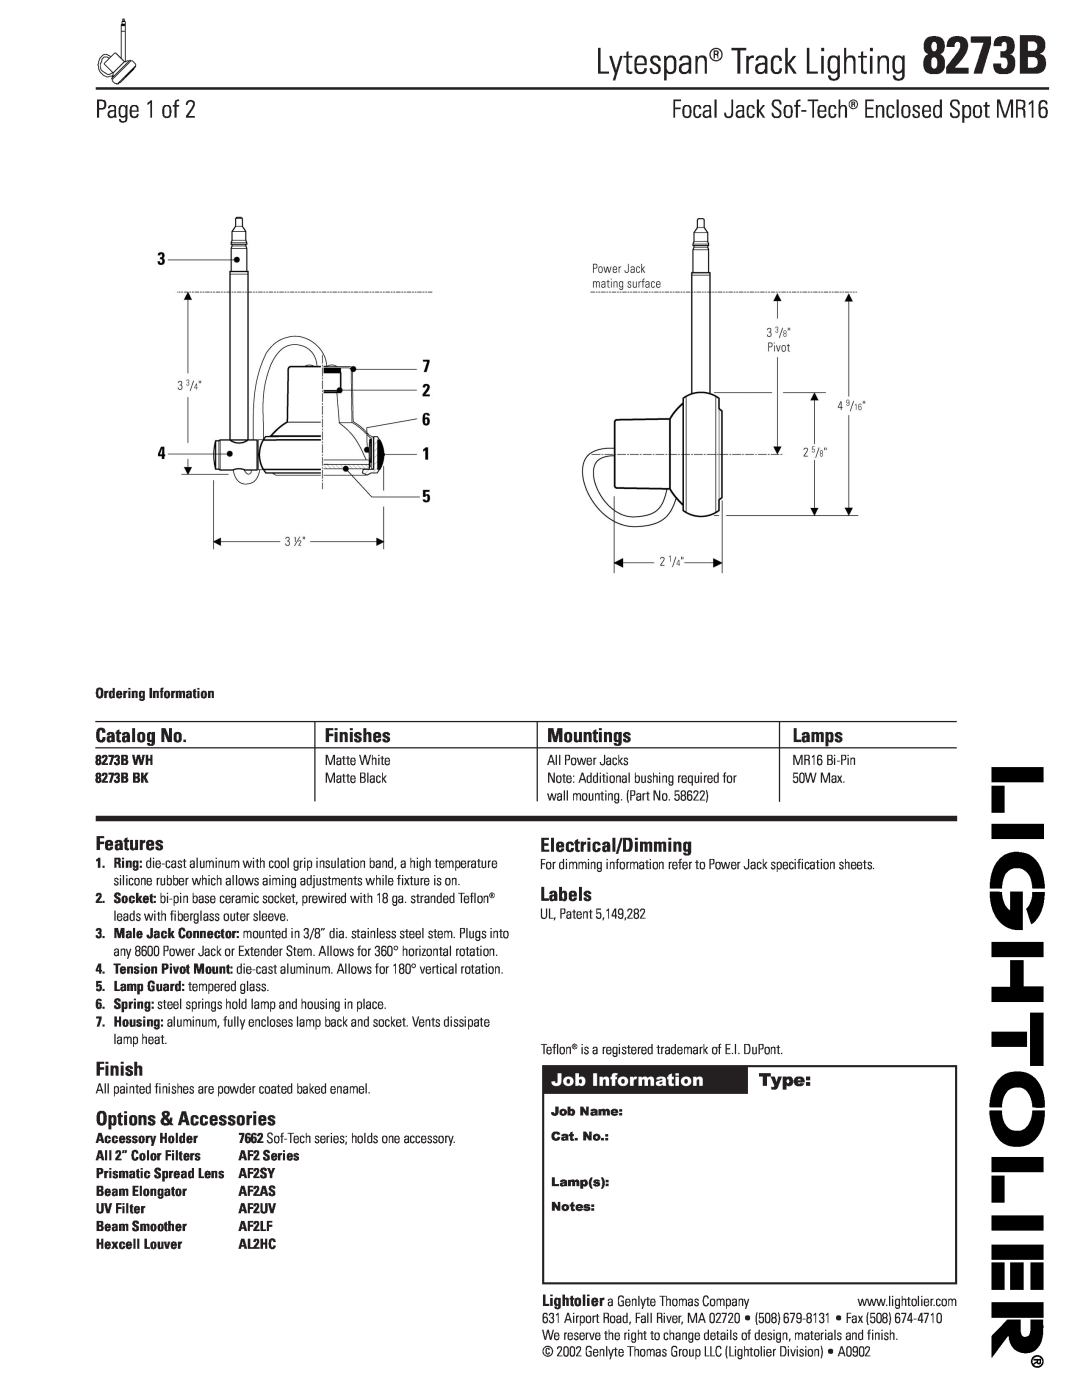 Lightolier specifications Lytespan Track Lighting 8273B, Page 1 of, Job Information, Type, Catalog No, Finishes, Lamps 